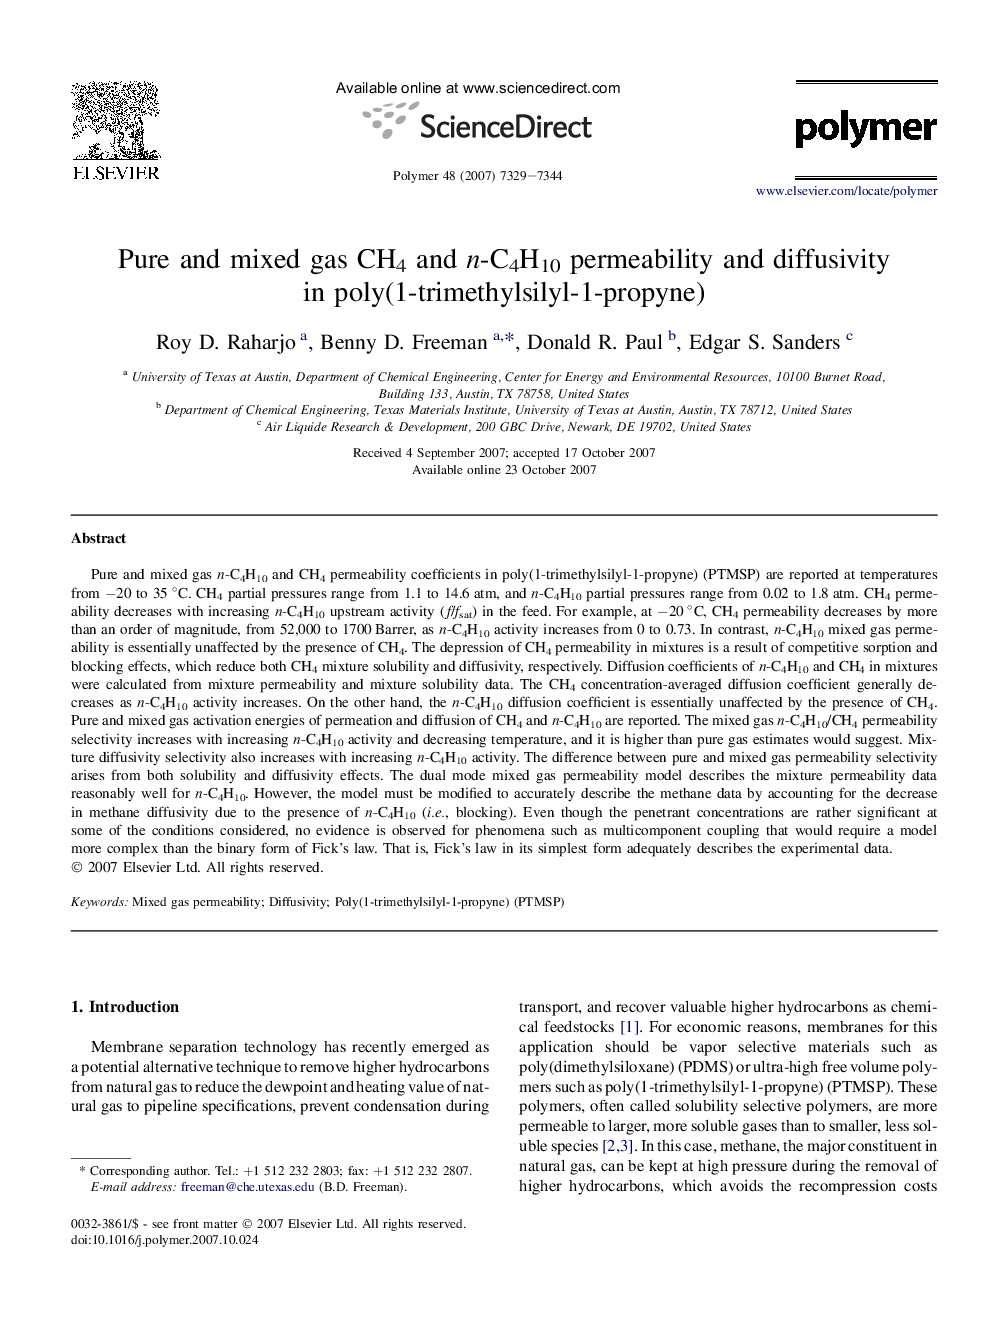 Pure and mixed gas CH4 and n-C4H10 permeability and diffusivity in poly(1-trimethylsilyl-1-propyne)